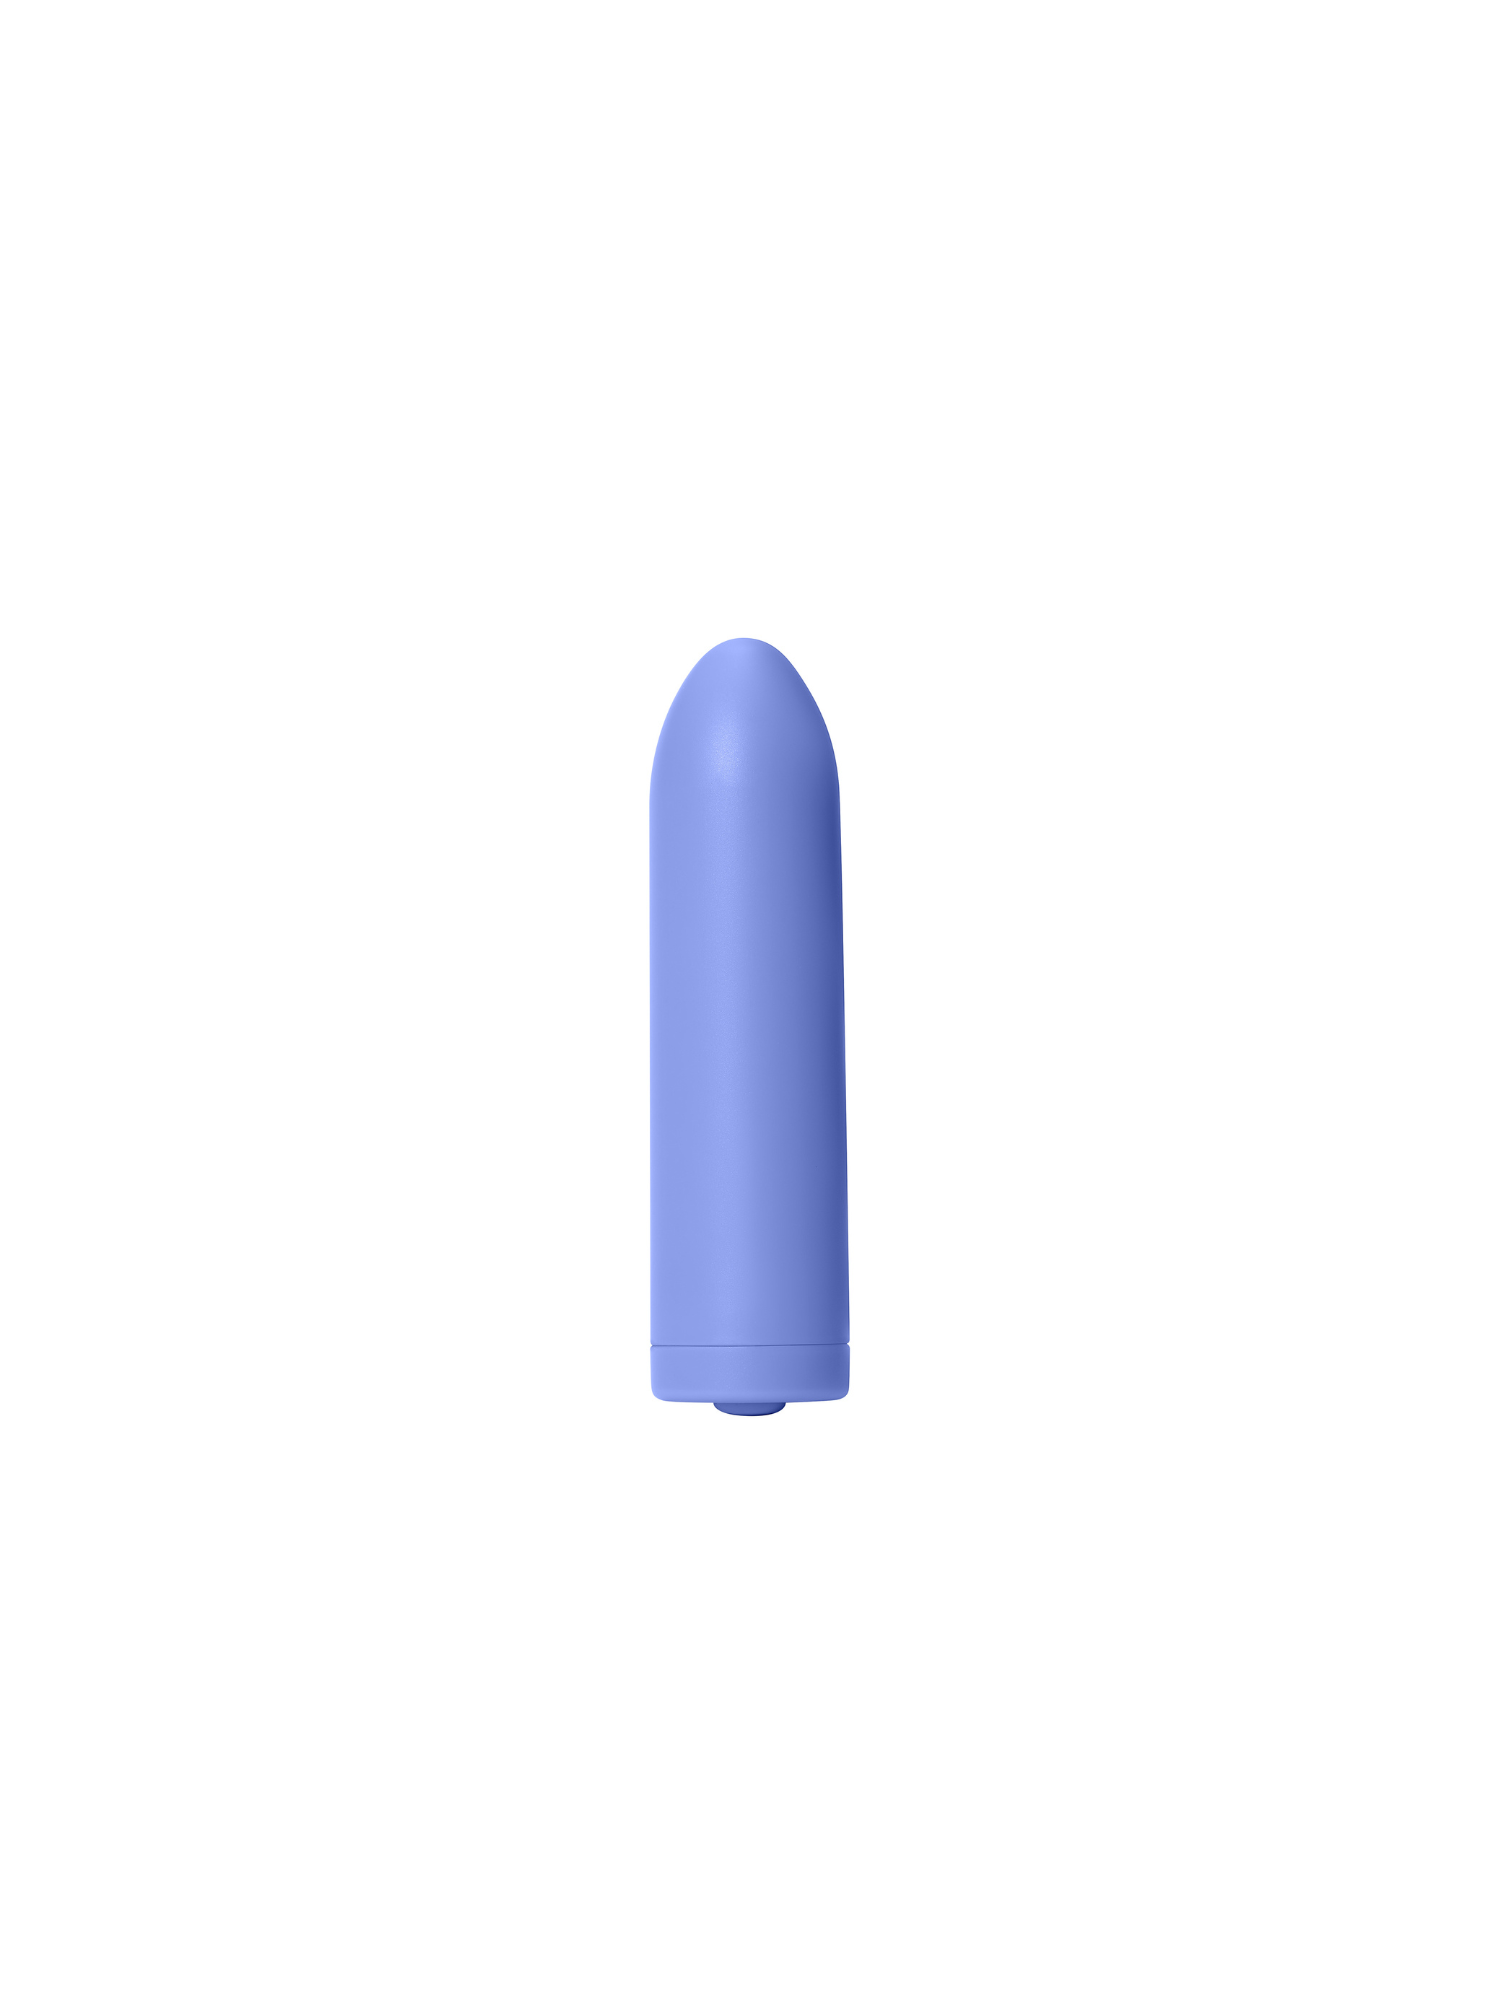 Zee Bullet Vibrator, Dame, Vibrator, Periwinkle, Lapis, Nourished, Sexual Wellness, Portable, USB Rechargeable, Water Resitance, ABS Plastic, Internal + External, 3 Patterns, 3 Intentions, First time user, Pleasure, Simple Vibe, Sexual Pleasure, Seks, Toy, Sexual Satisfaction, Bedroom, Vagina, Vulva, Seks Speeltje, Orgasm, Dame Products